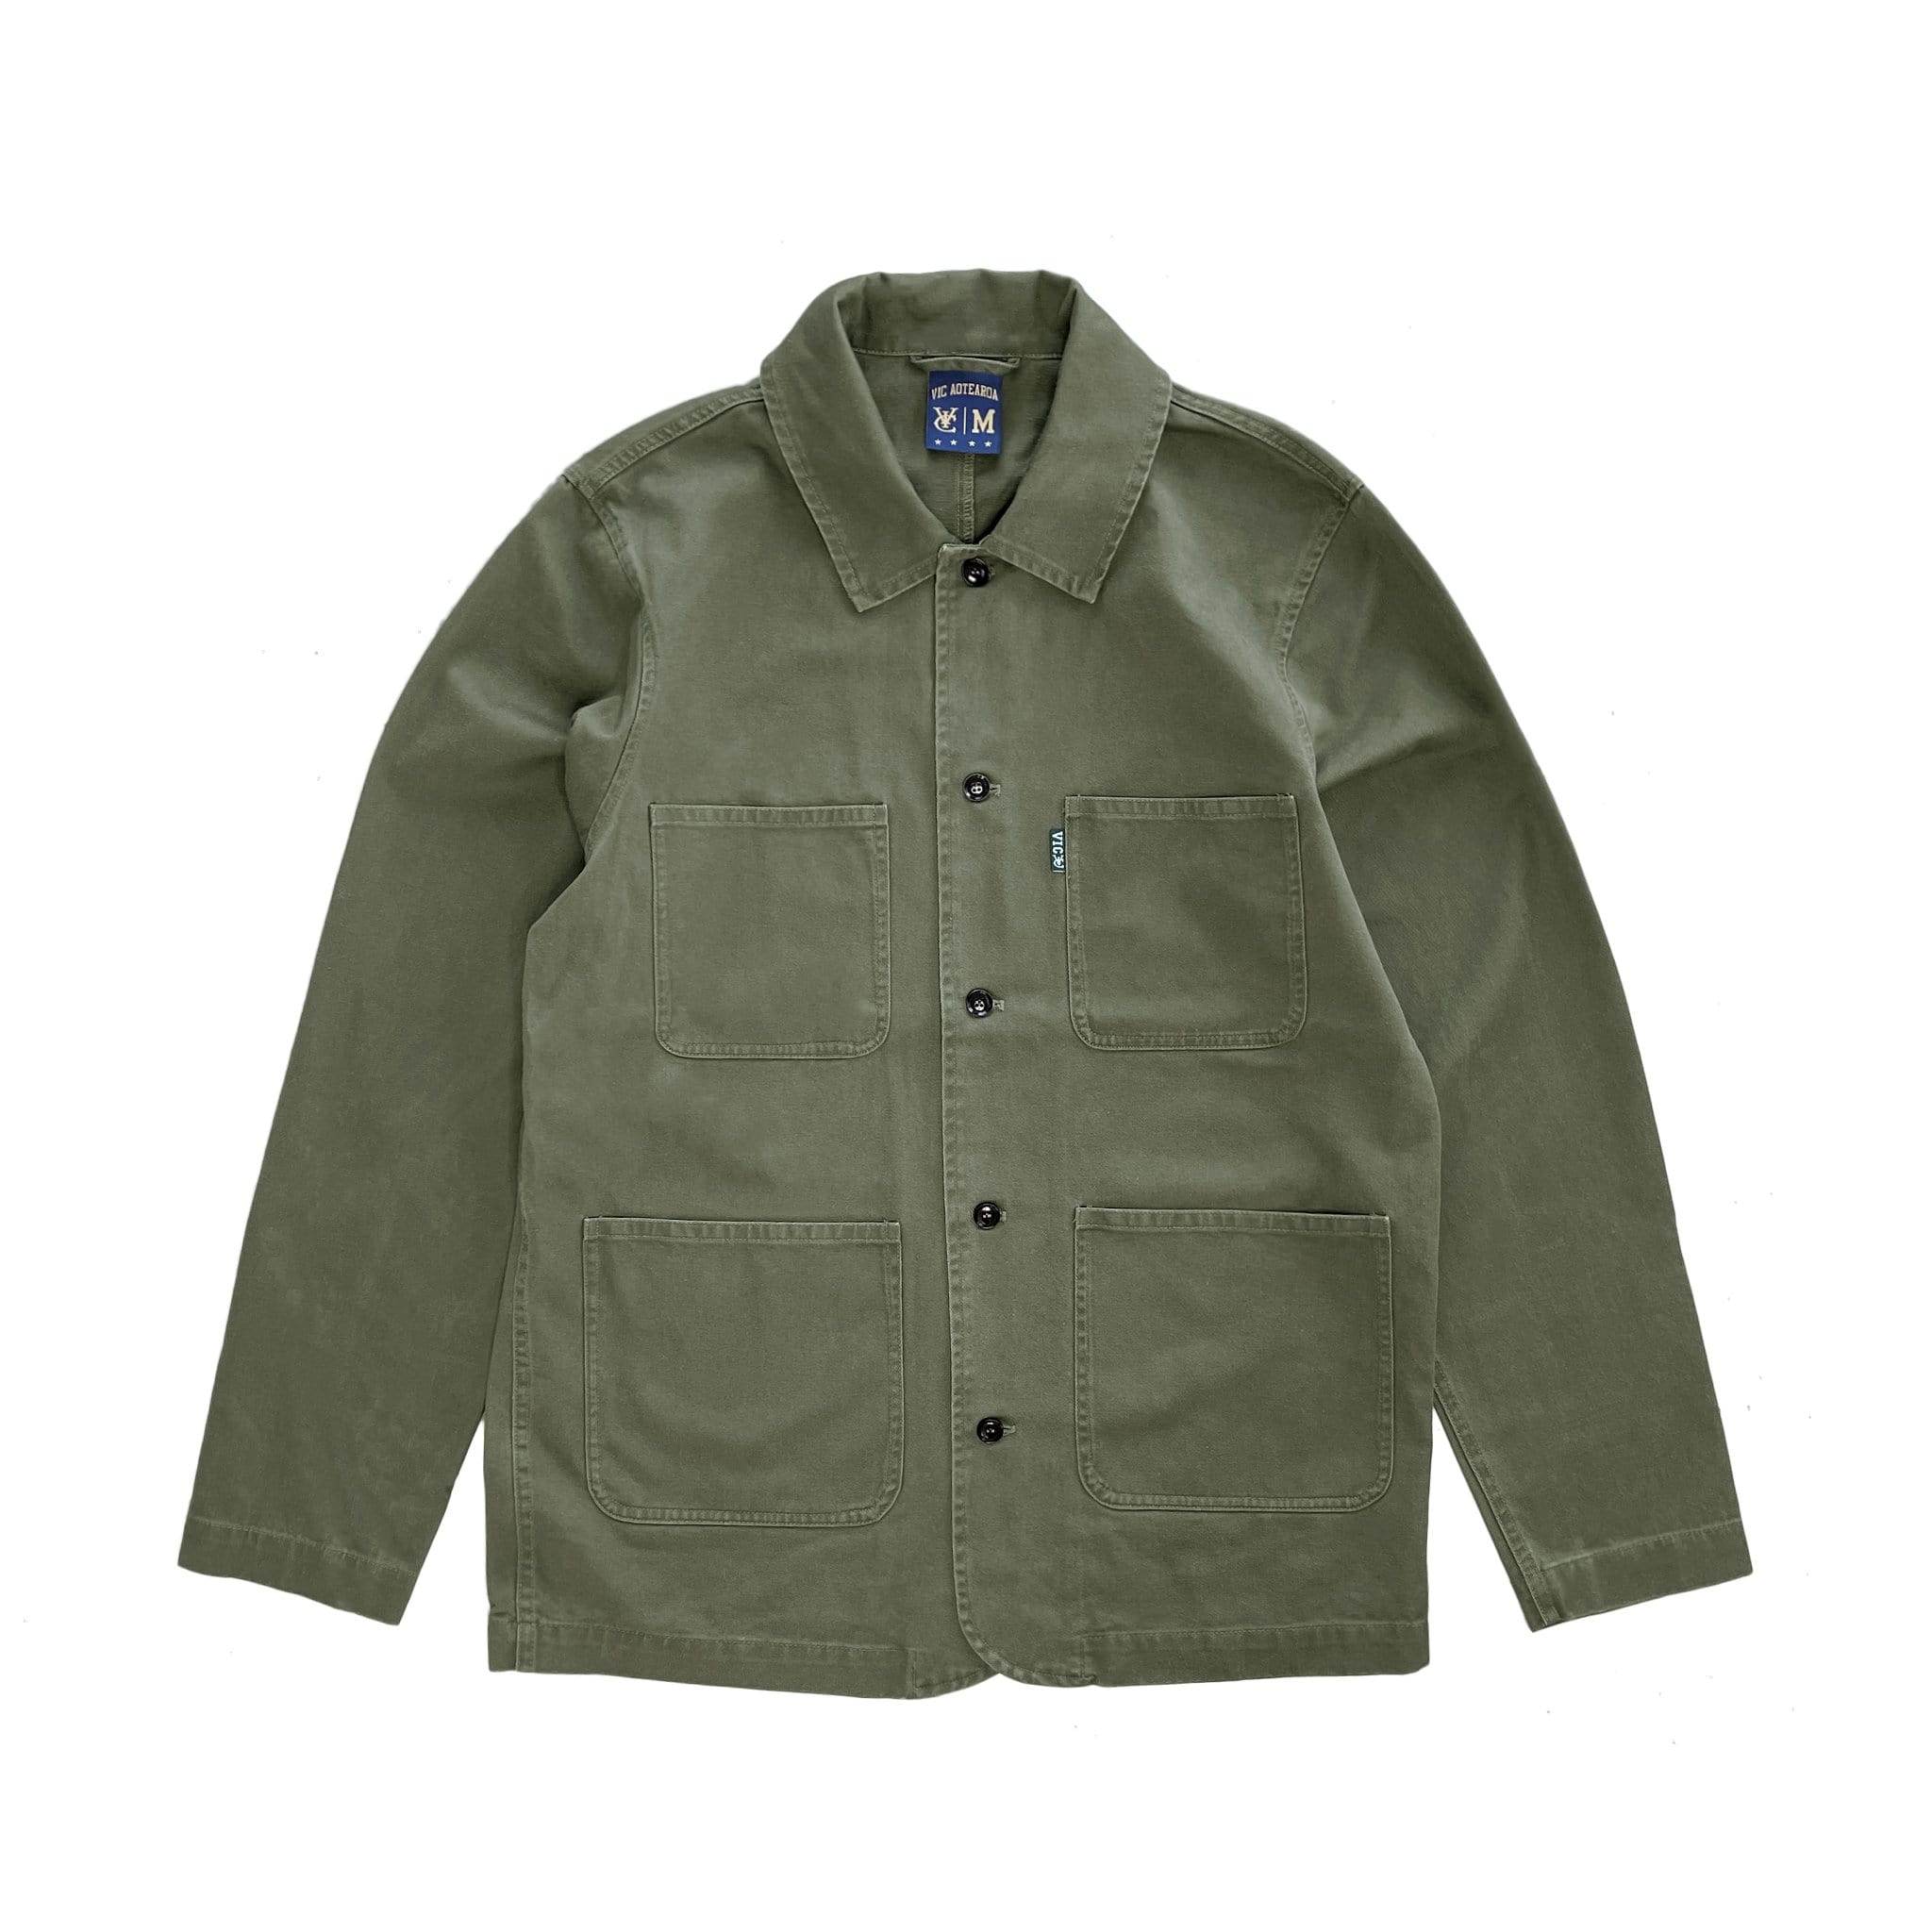 Premium quality classic workwear chore jacket coat by New Zealand skate and streetwear clothing label VIC Apparel. Regular fit, Heavyweight, 300gsm, 100% Cotton, VIC pip label detail on the chest pocket. 